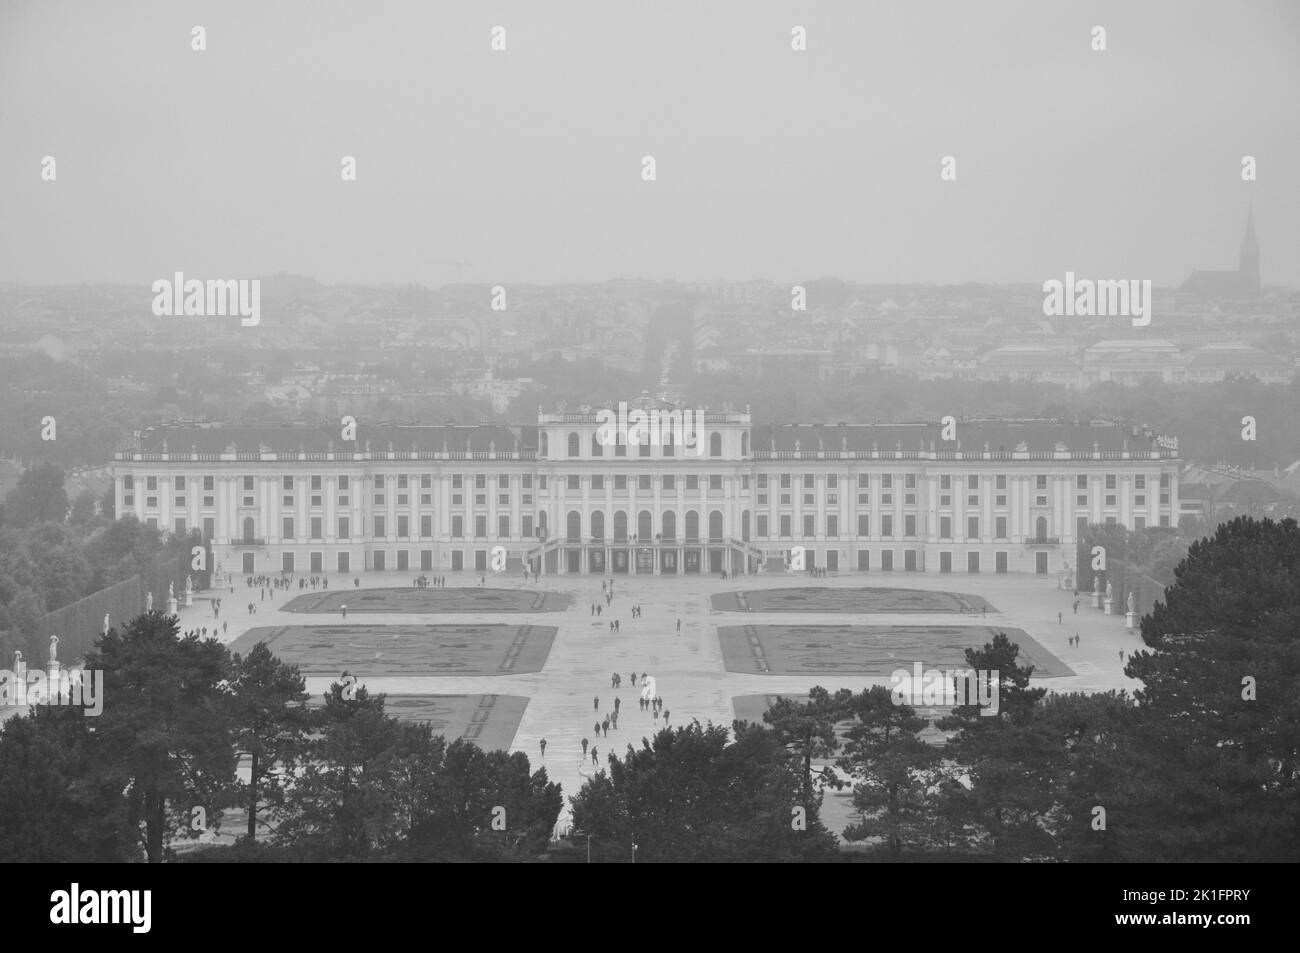 The parks and forecourt of Schoenbrunn Palace in Vienna, Austria Stock Photo